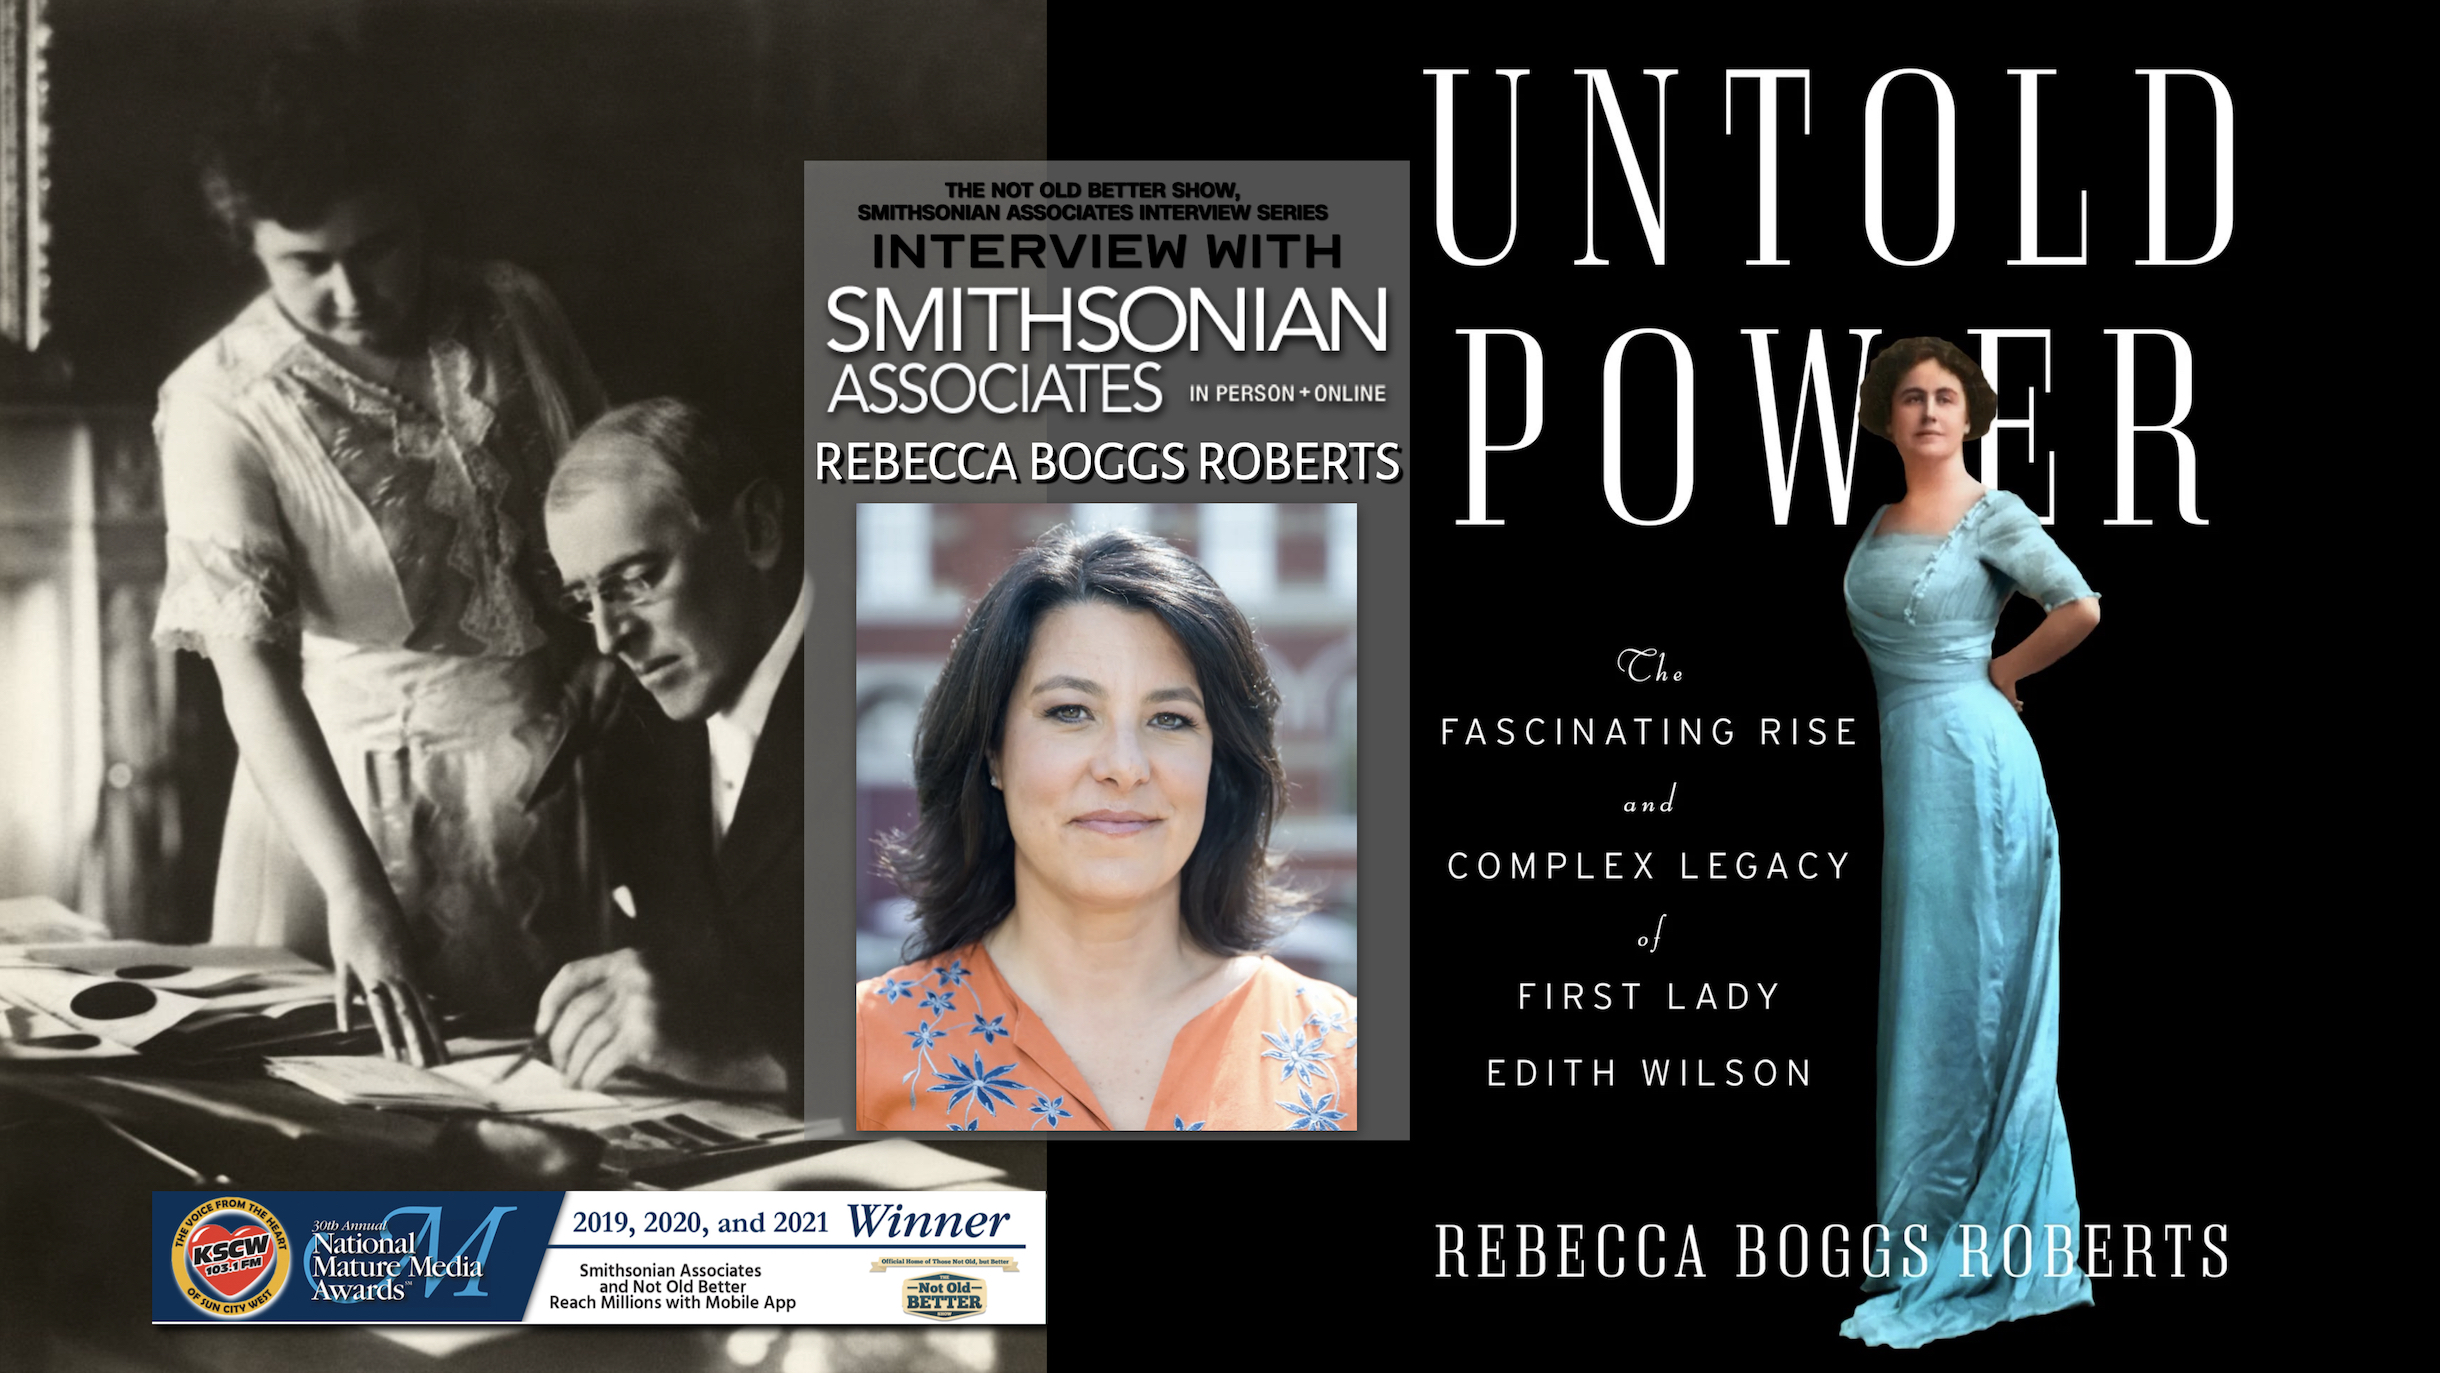 Edith Wilson: The First  Woman President – Rebecca Boggs Roberts